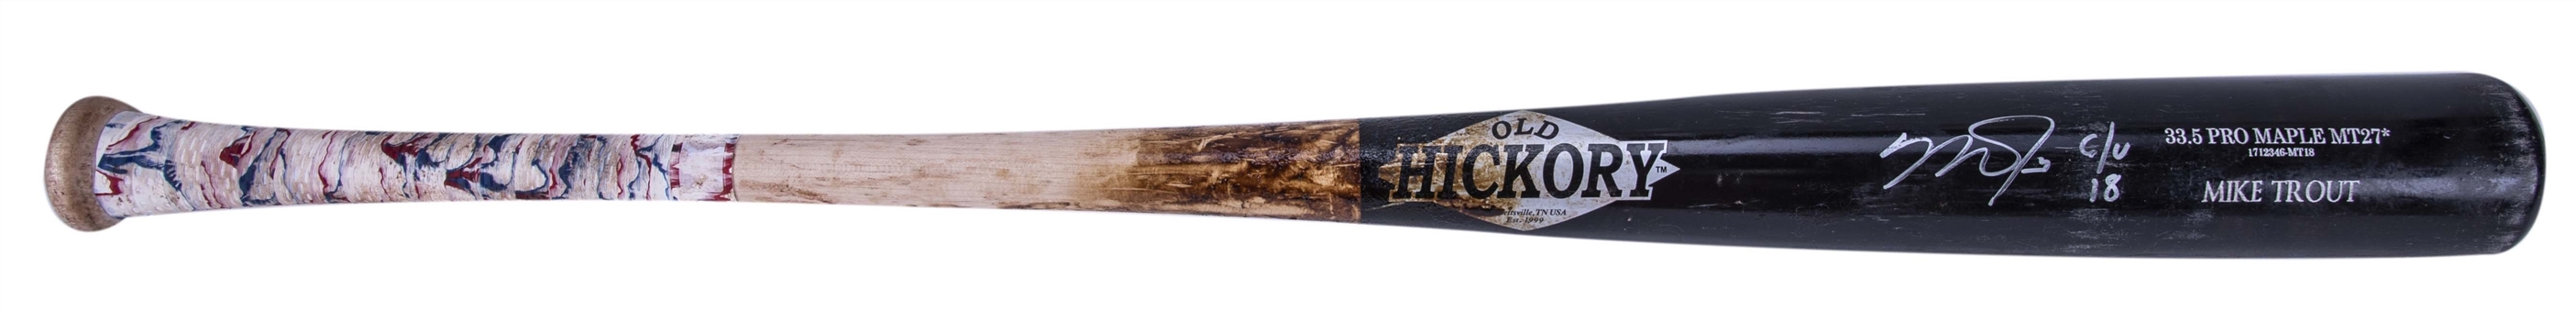 2018 Mike Trout Game Used & Signed Old Hickory MT27* Bat Photo Matched To 6/28/18 Against Boston Red Sox (PSA/DNA GU 10 & Anderson LOA)